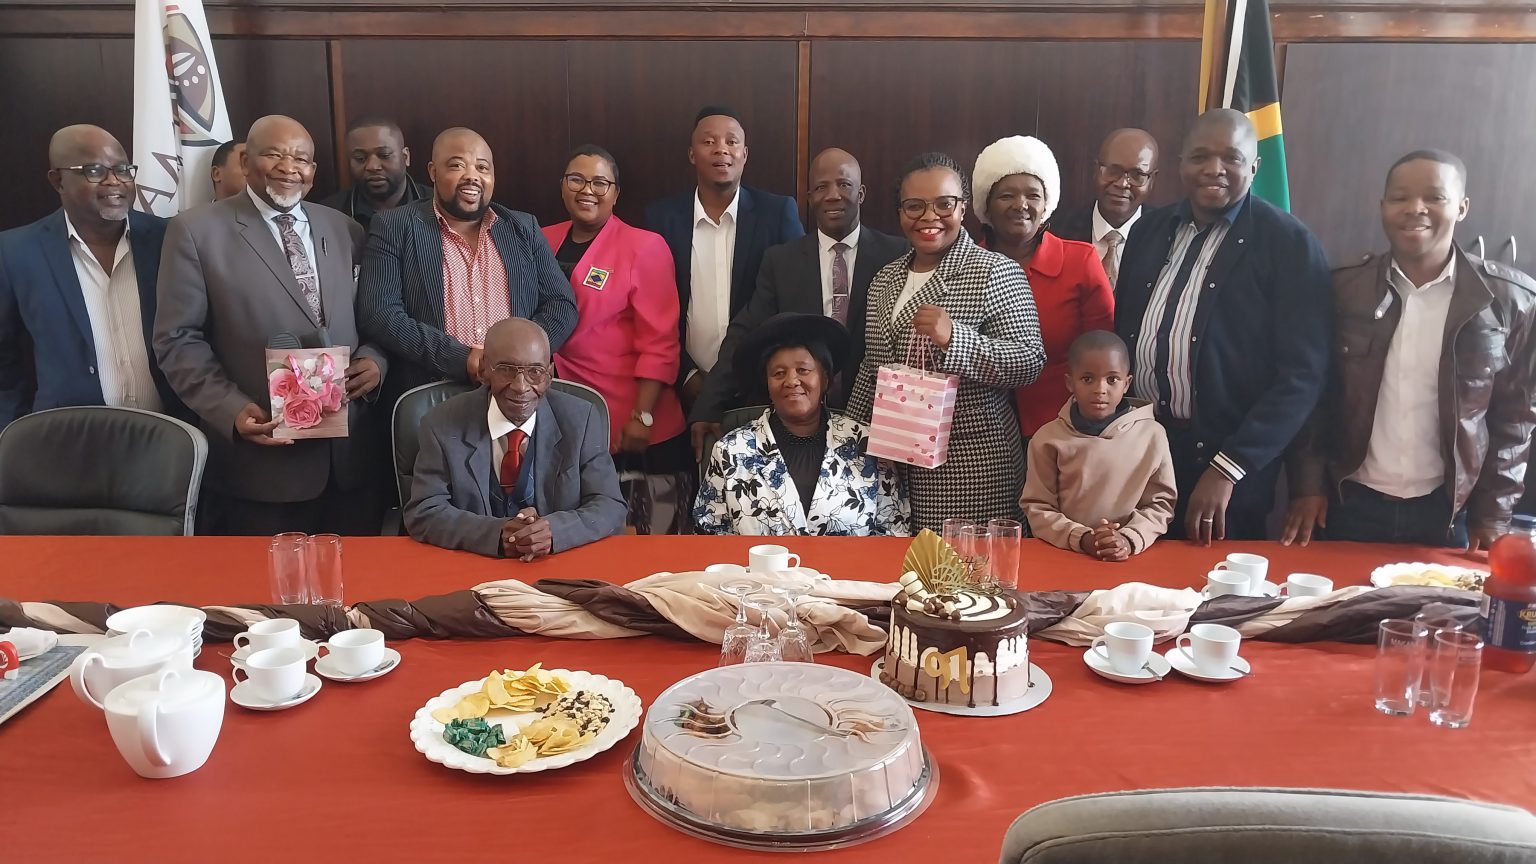 Makana Municipality councillors celebrated with Mntukanti July Sidina (seated, left), his family and Old Apostolic Church leaders, the senior citizen's 97th birthday at a special council meeting on Wednesday. Photo: Luvuyo Mjekula